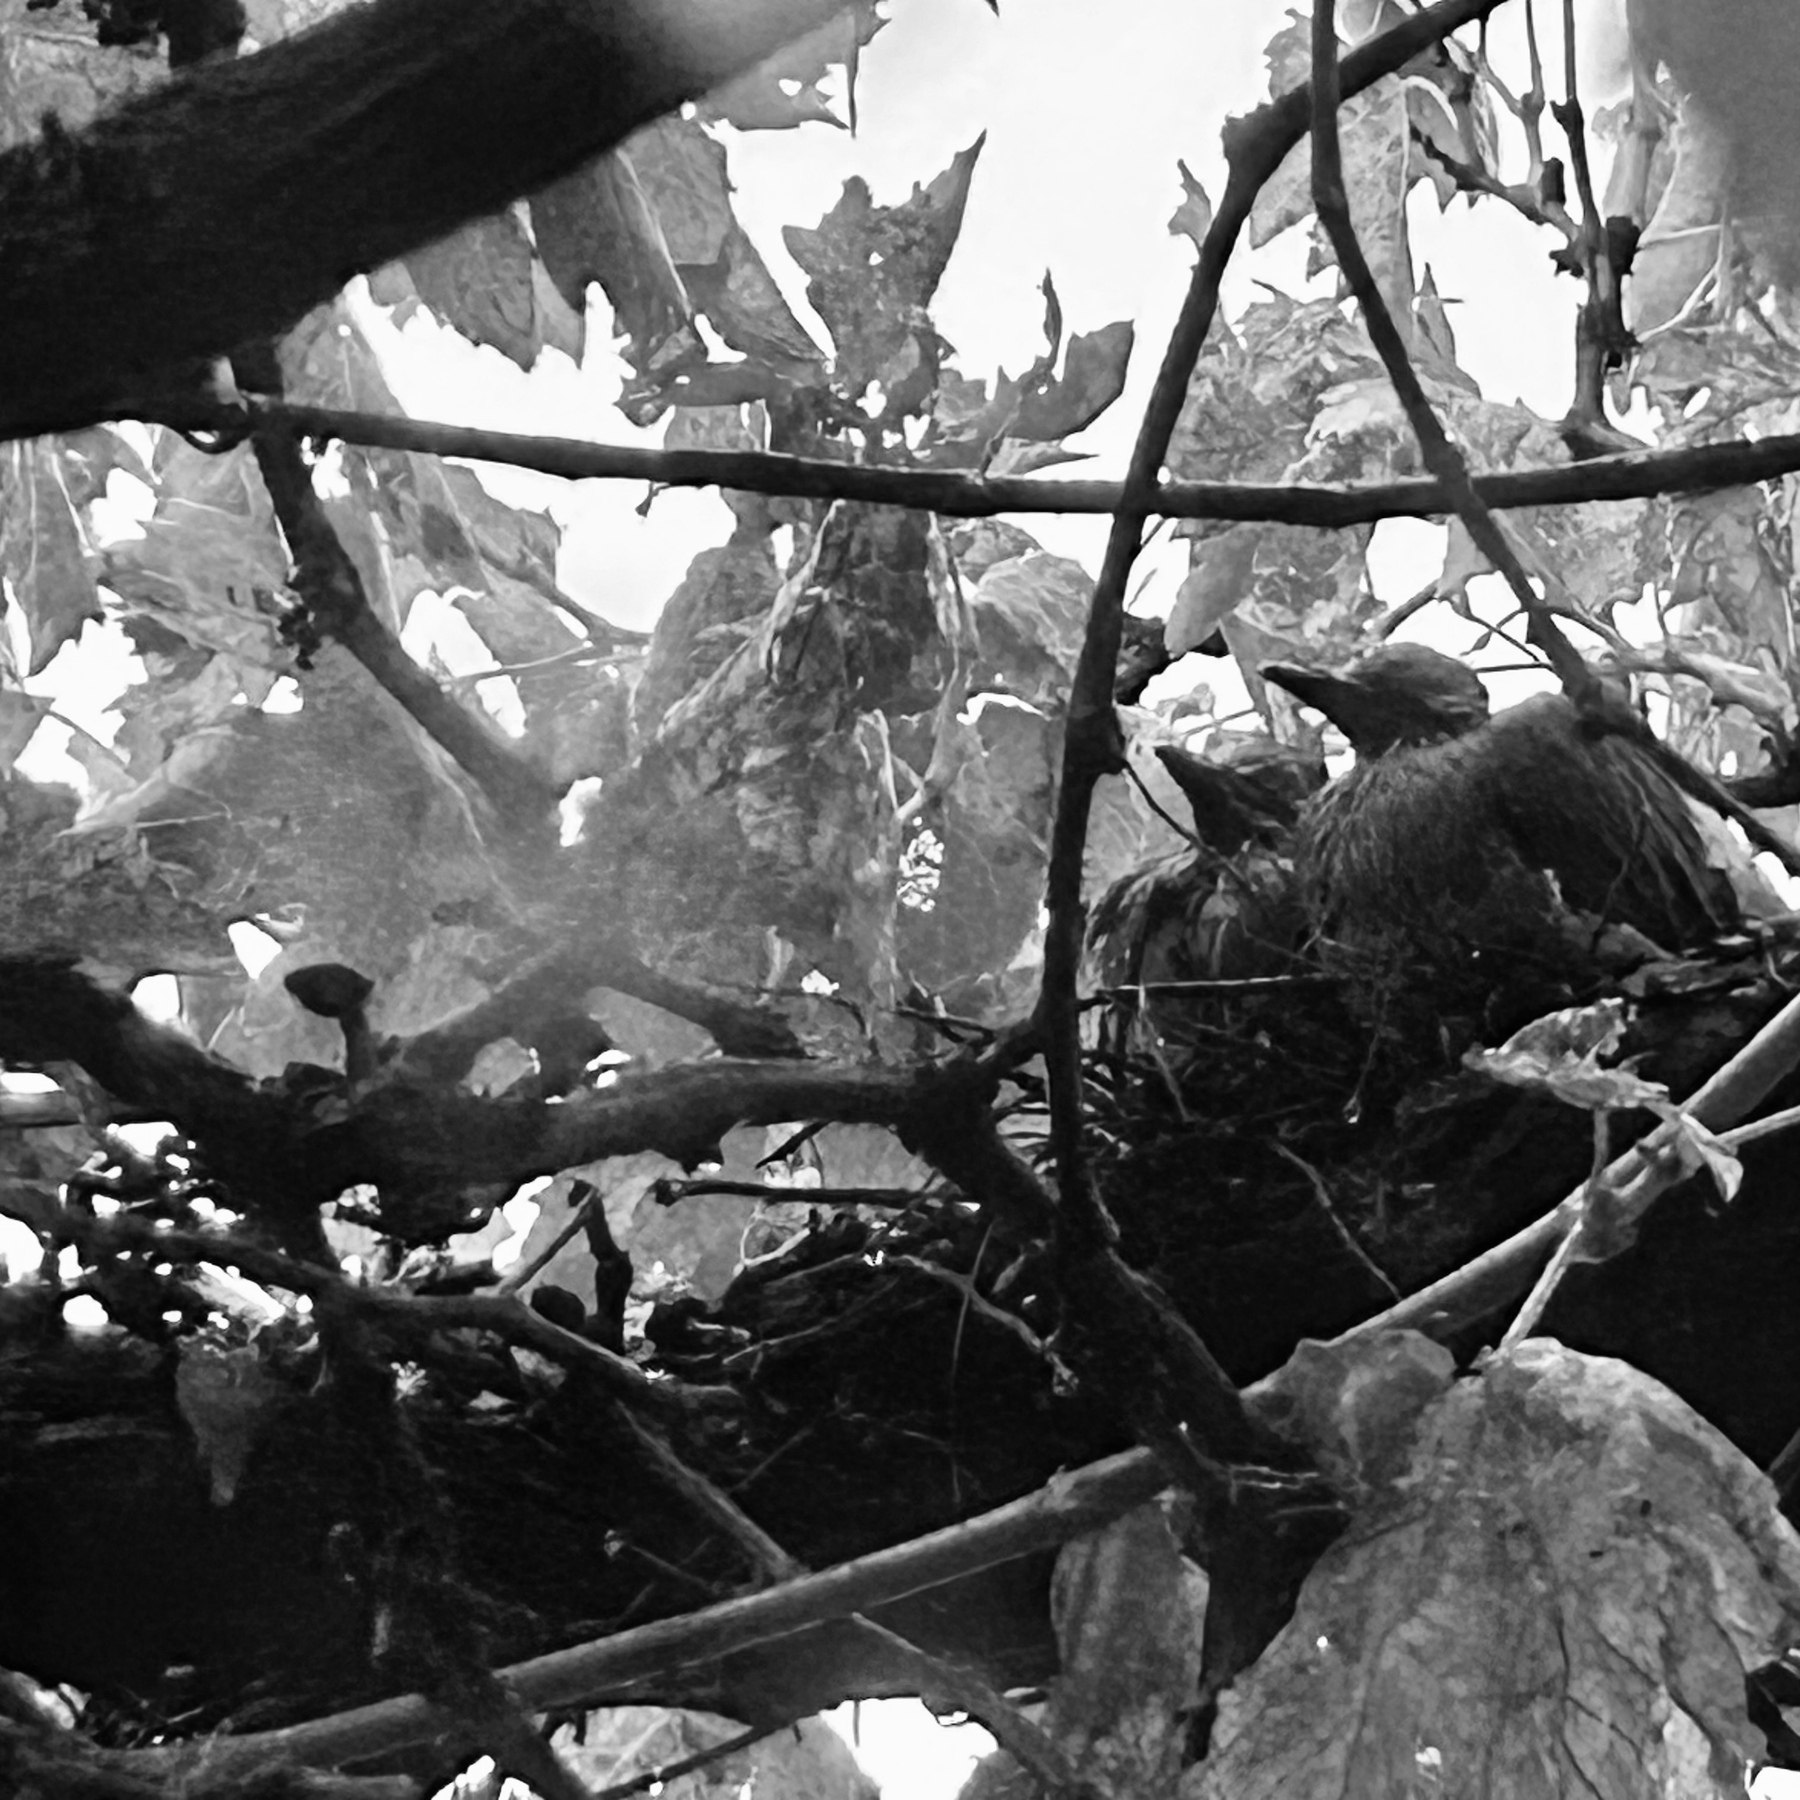 Two, young doves sitting in a nest, surrounded by the branches and leaves of a grapevine. The sky is visible through the foliage.